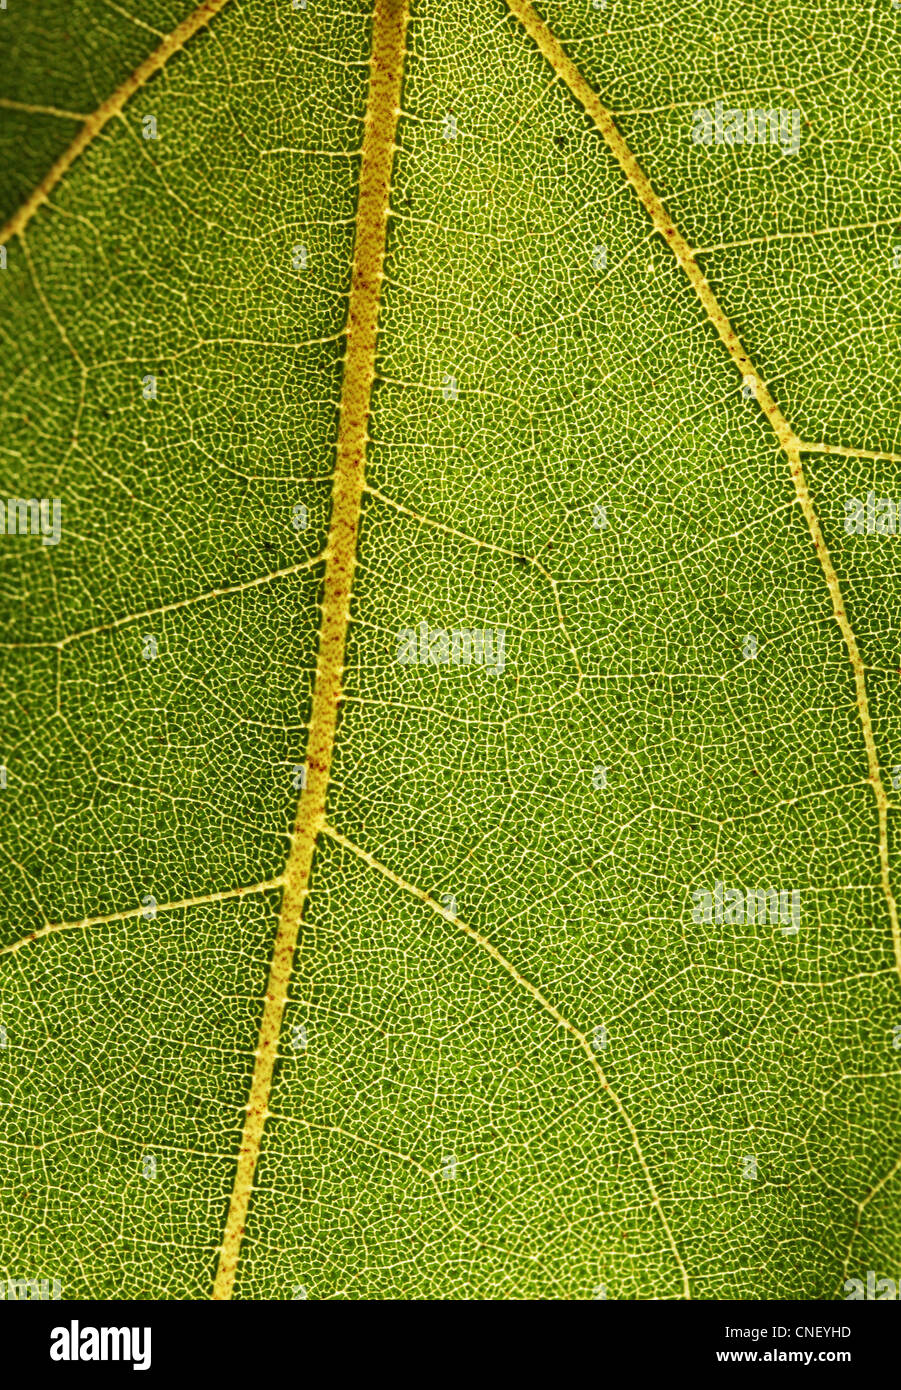 Highly detailed macro photo of a leaf showing network of veins Stock Photo